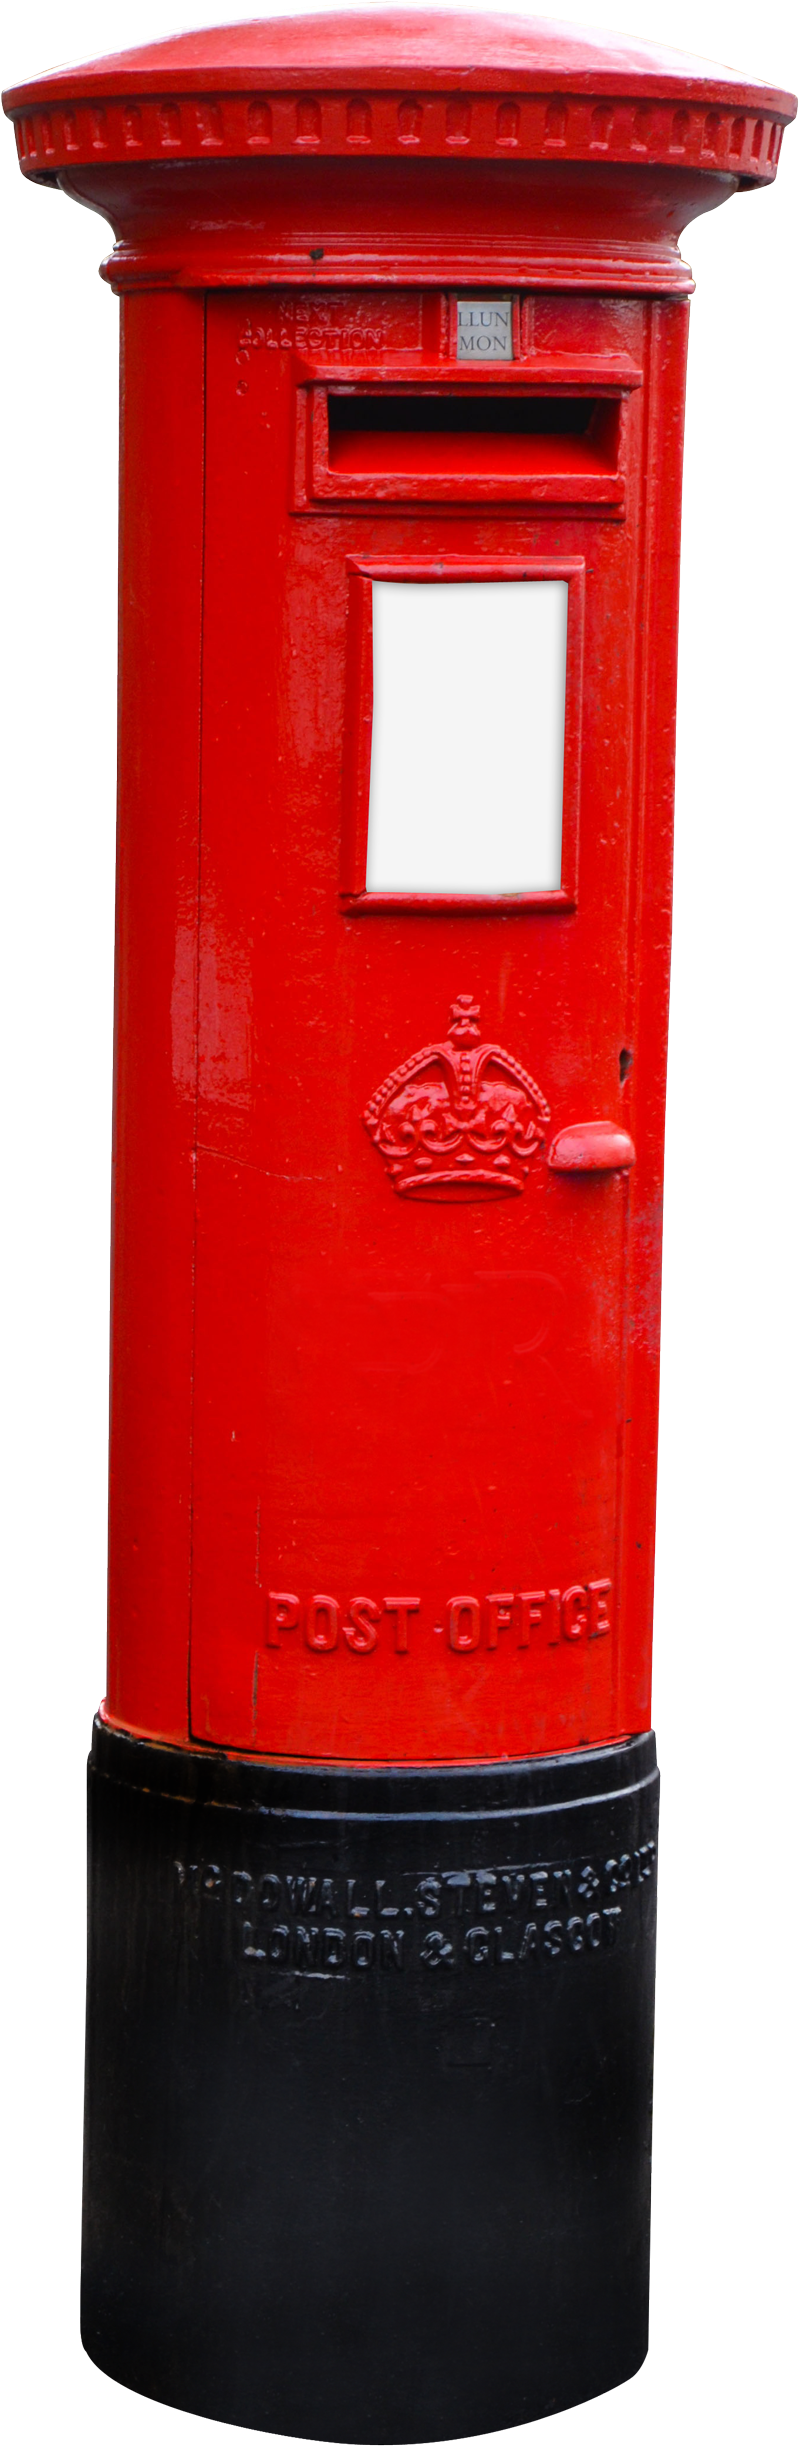 Postbox Pngimg004 Load20180523 Transparent Png Sticker - Postbox Png (1700x2705)